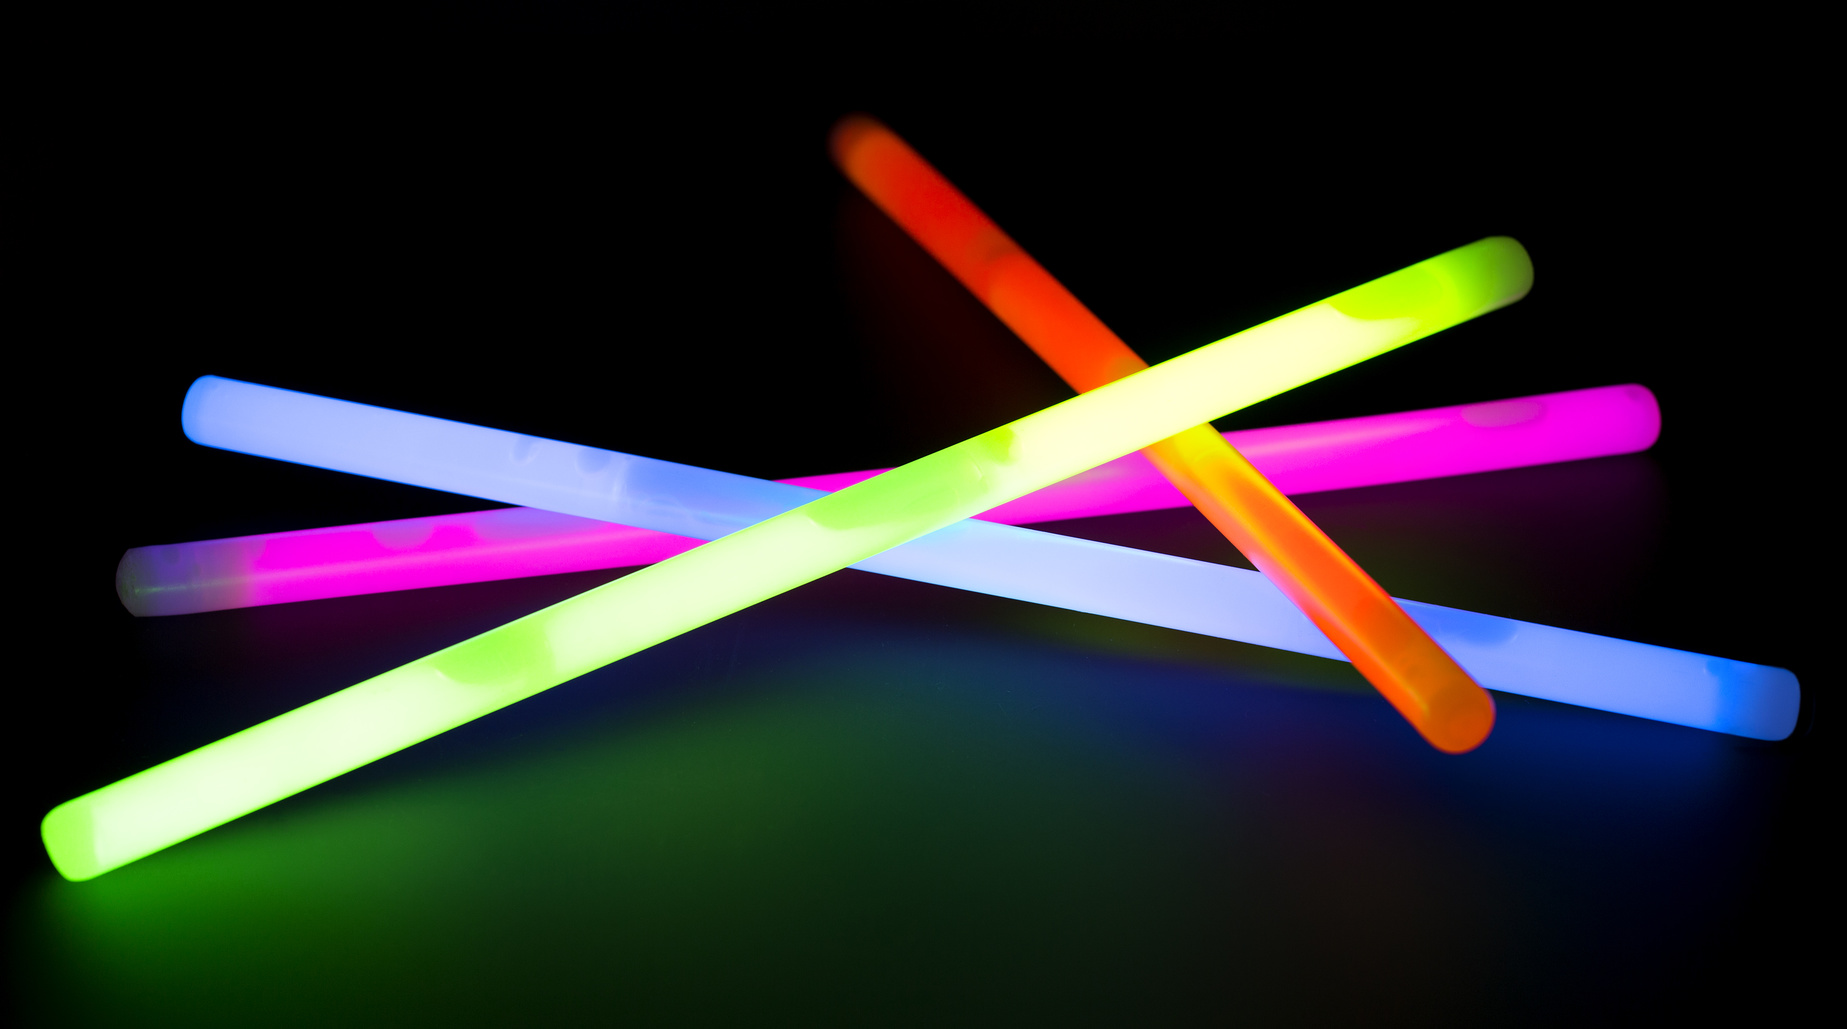 experiment-with-glow-sticks-experiment-exchange